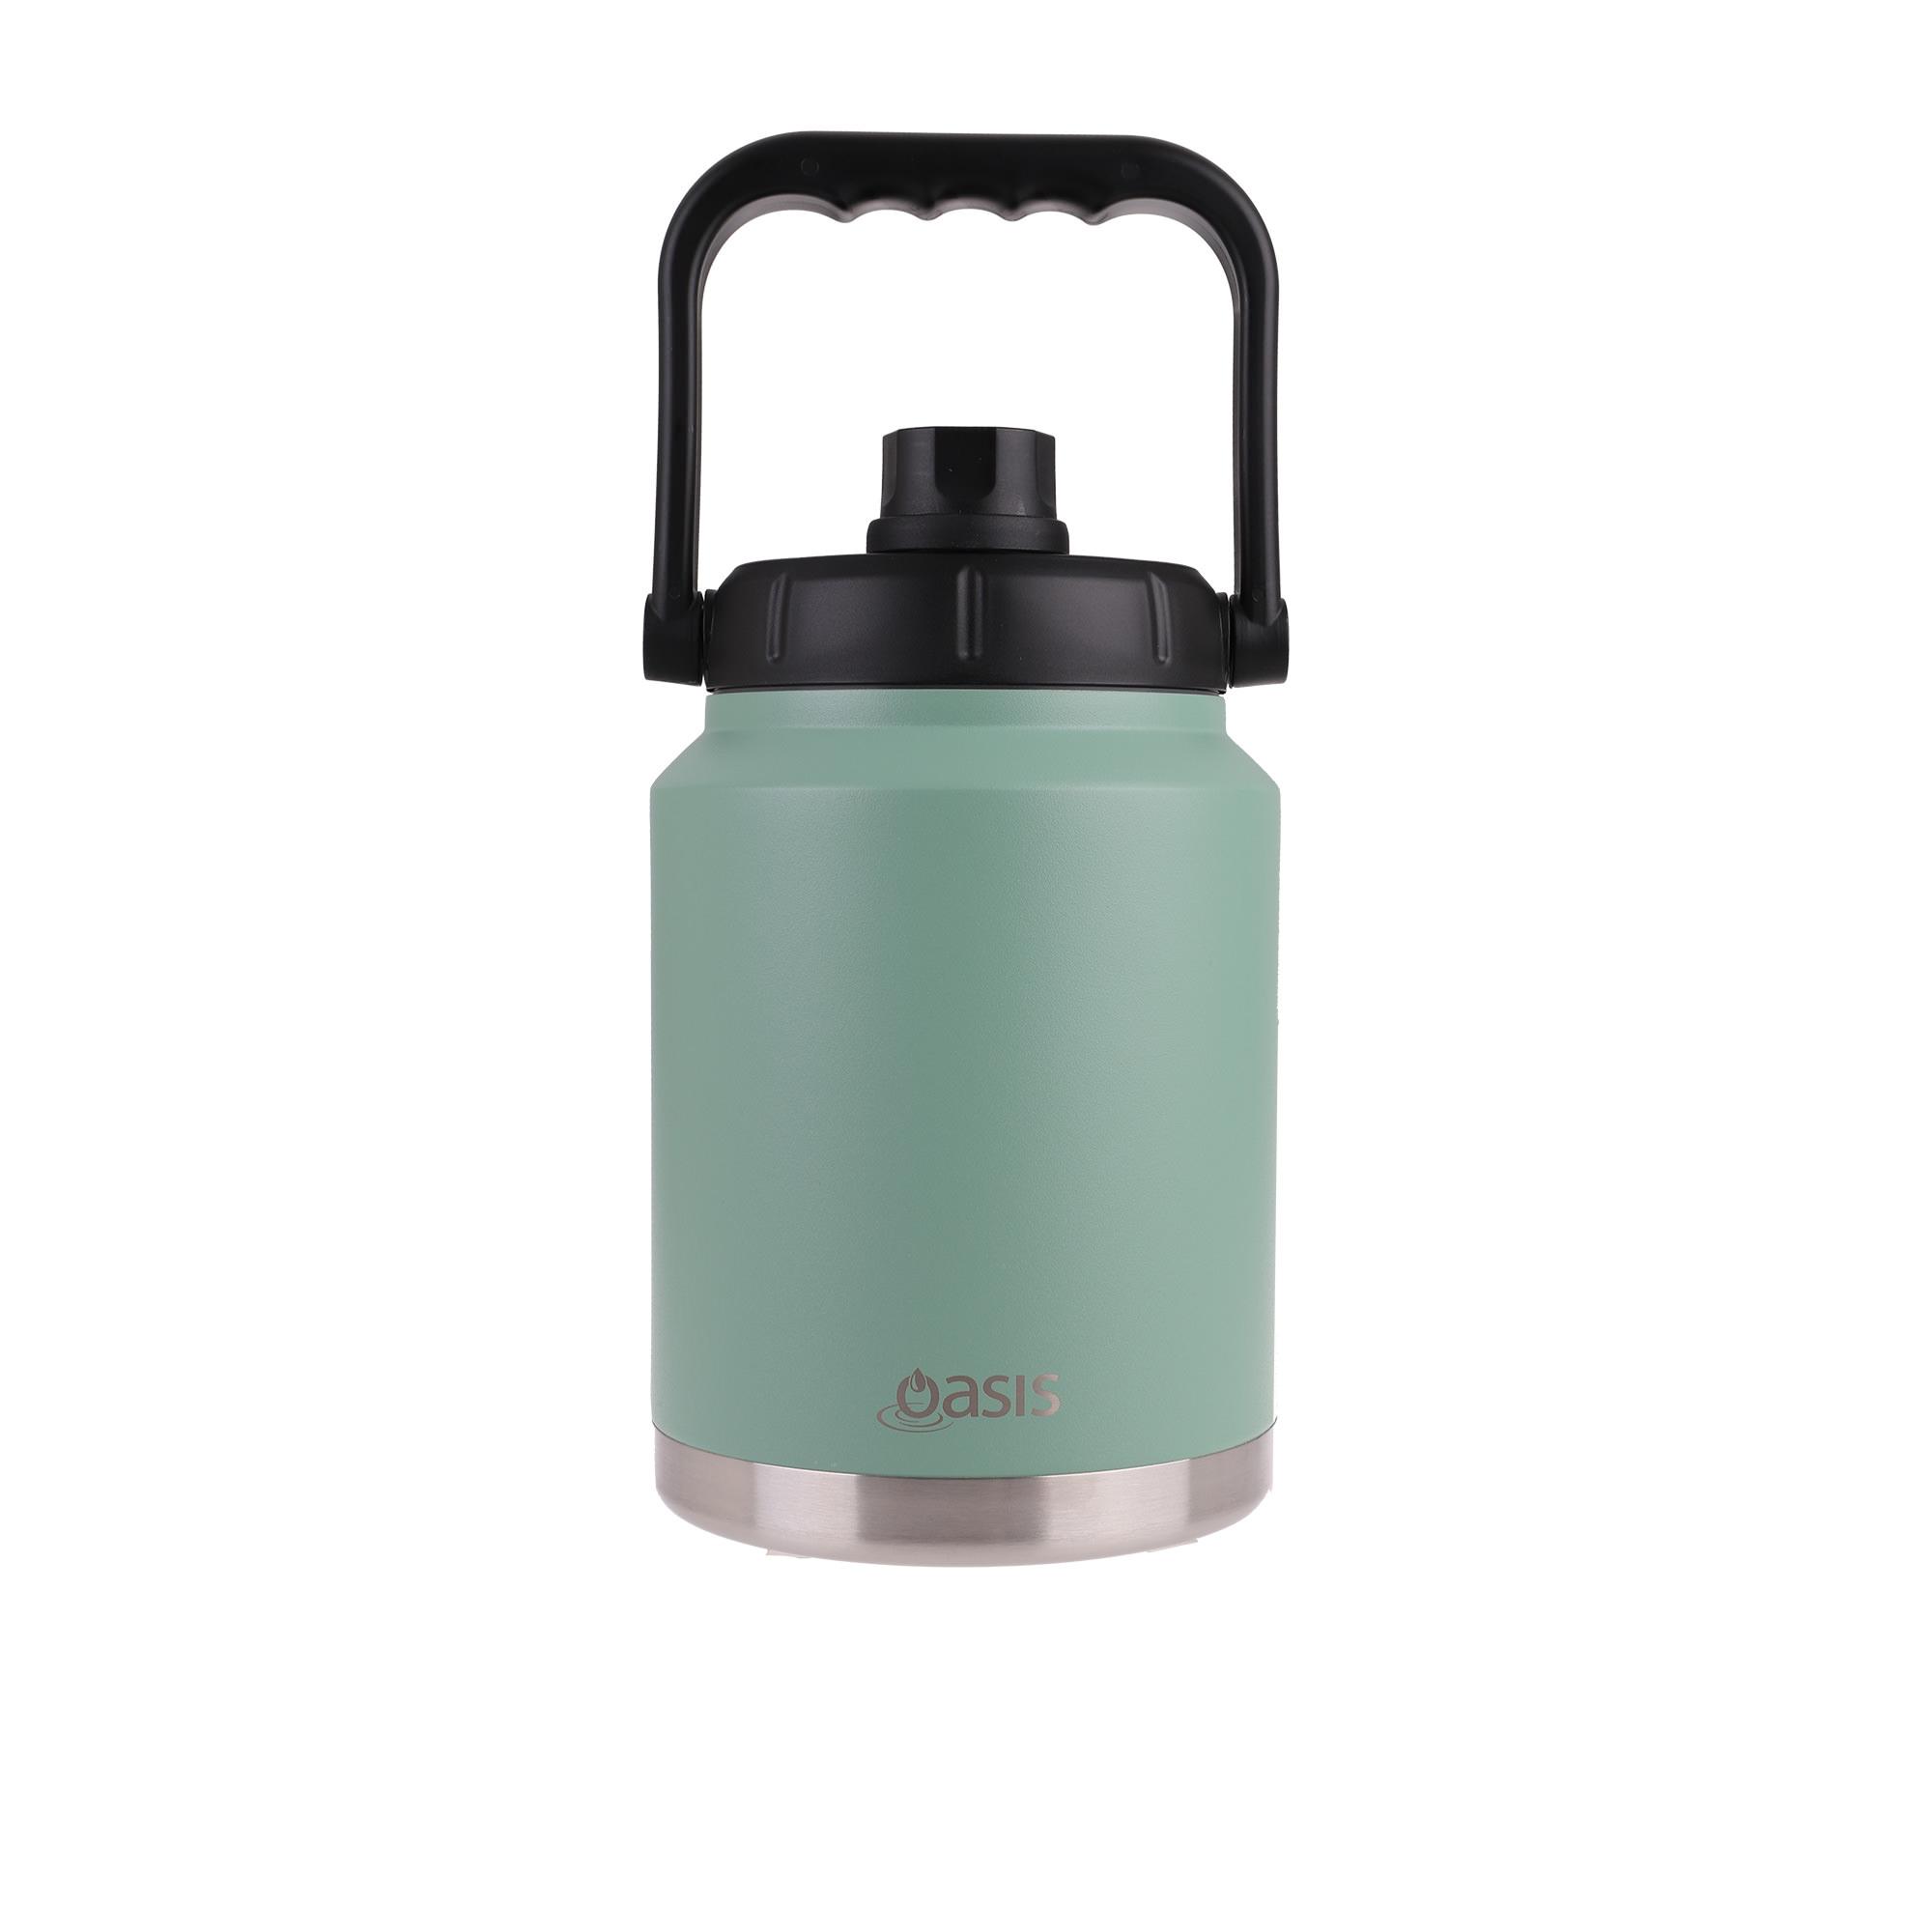 Oasis Insulated Jug with Carry Handle 2.1L Sage Green Image 1